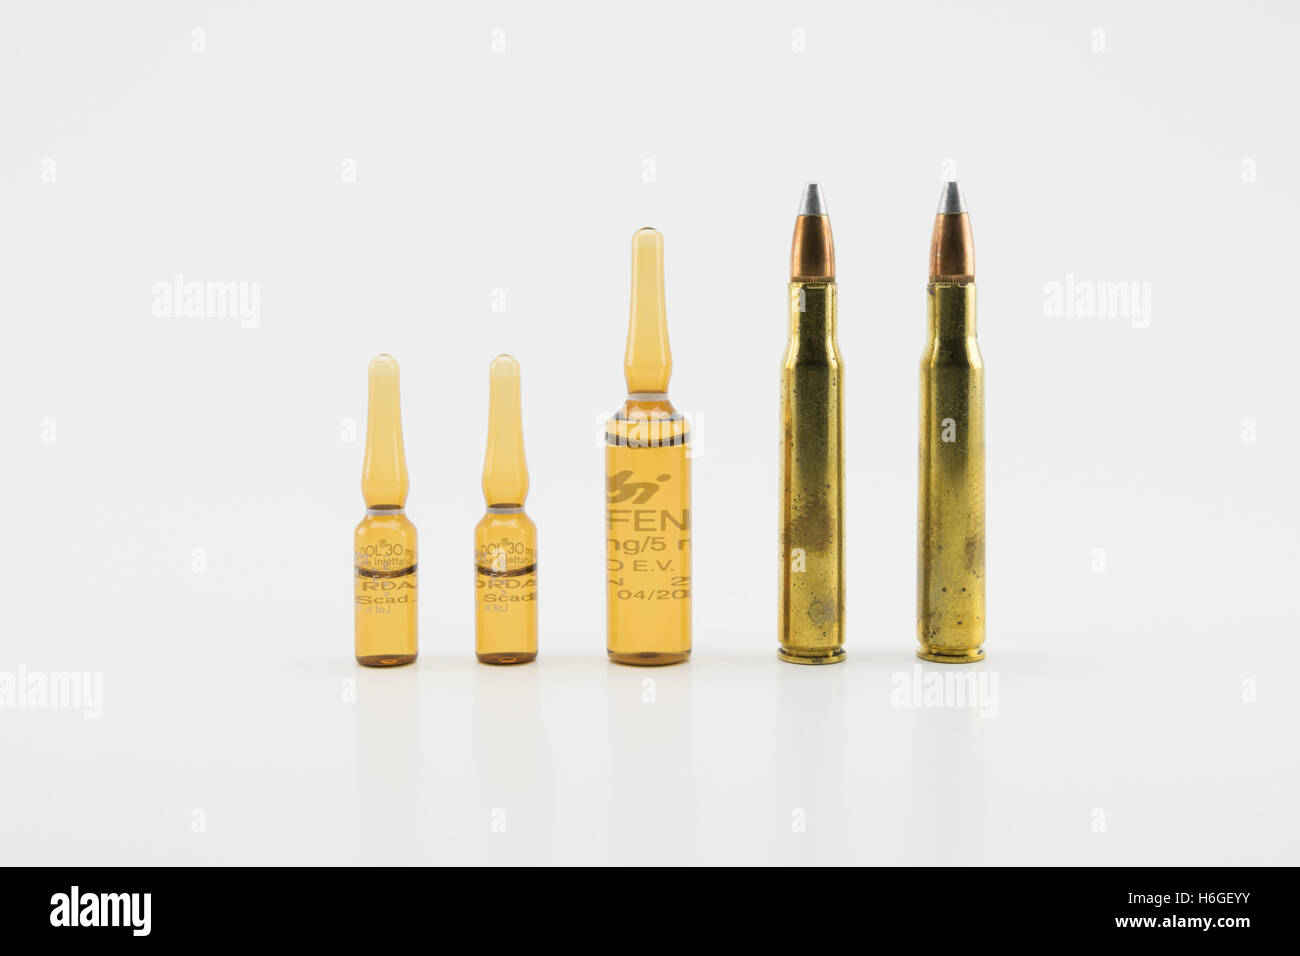 Verona, Italy - February 27, 2015: Composition with vials and bullets on white background Stock Photo